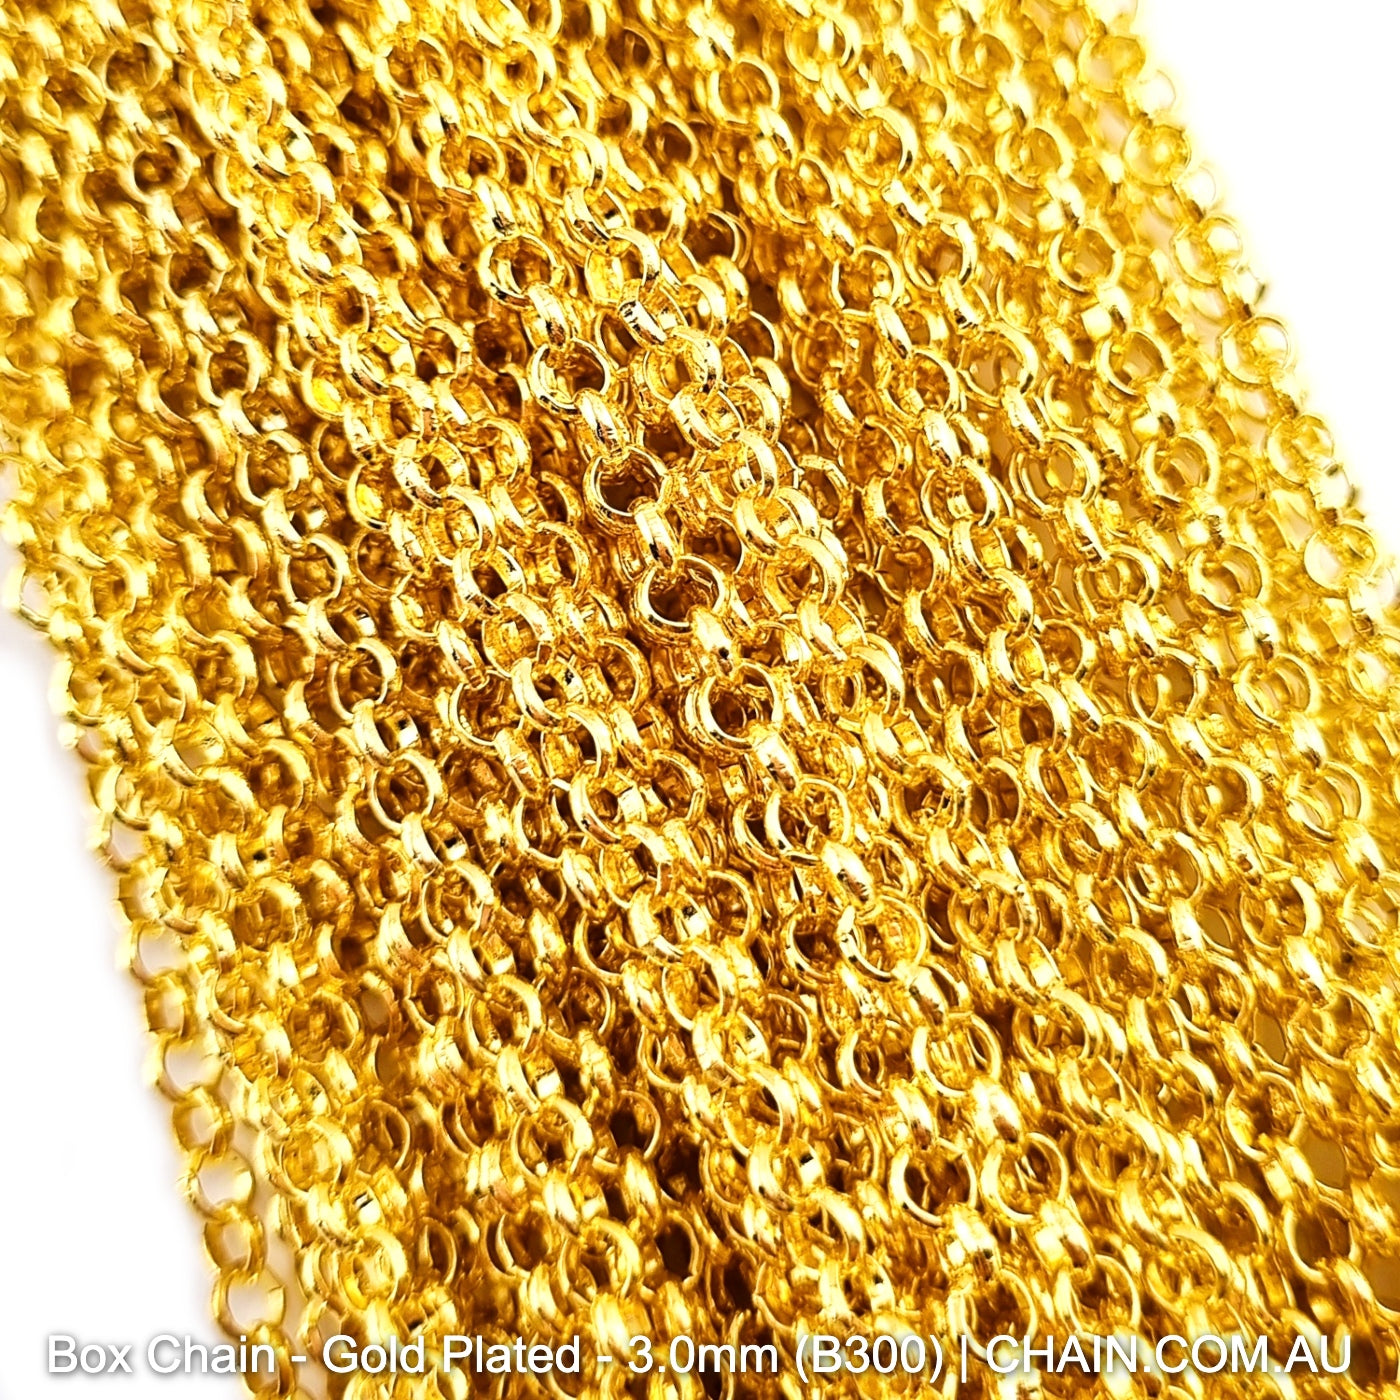 Box Jewellery Chain Gold Plated. Size: 3.0mm x 25m Reel. Shop Jewellery Chain online. Australia wide shipping. Chain.com.au